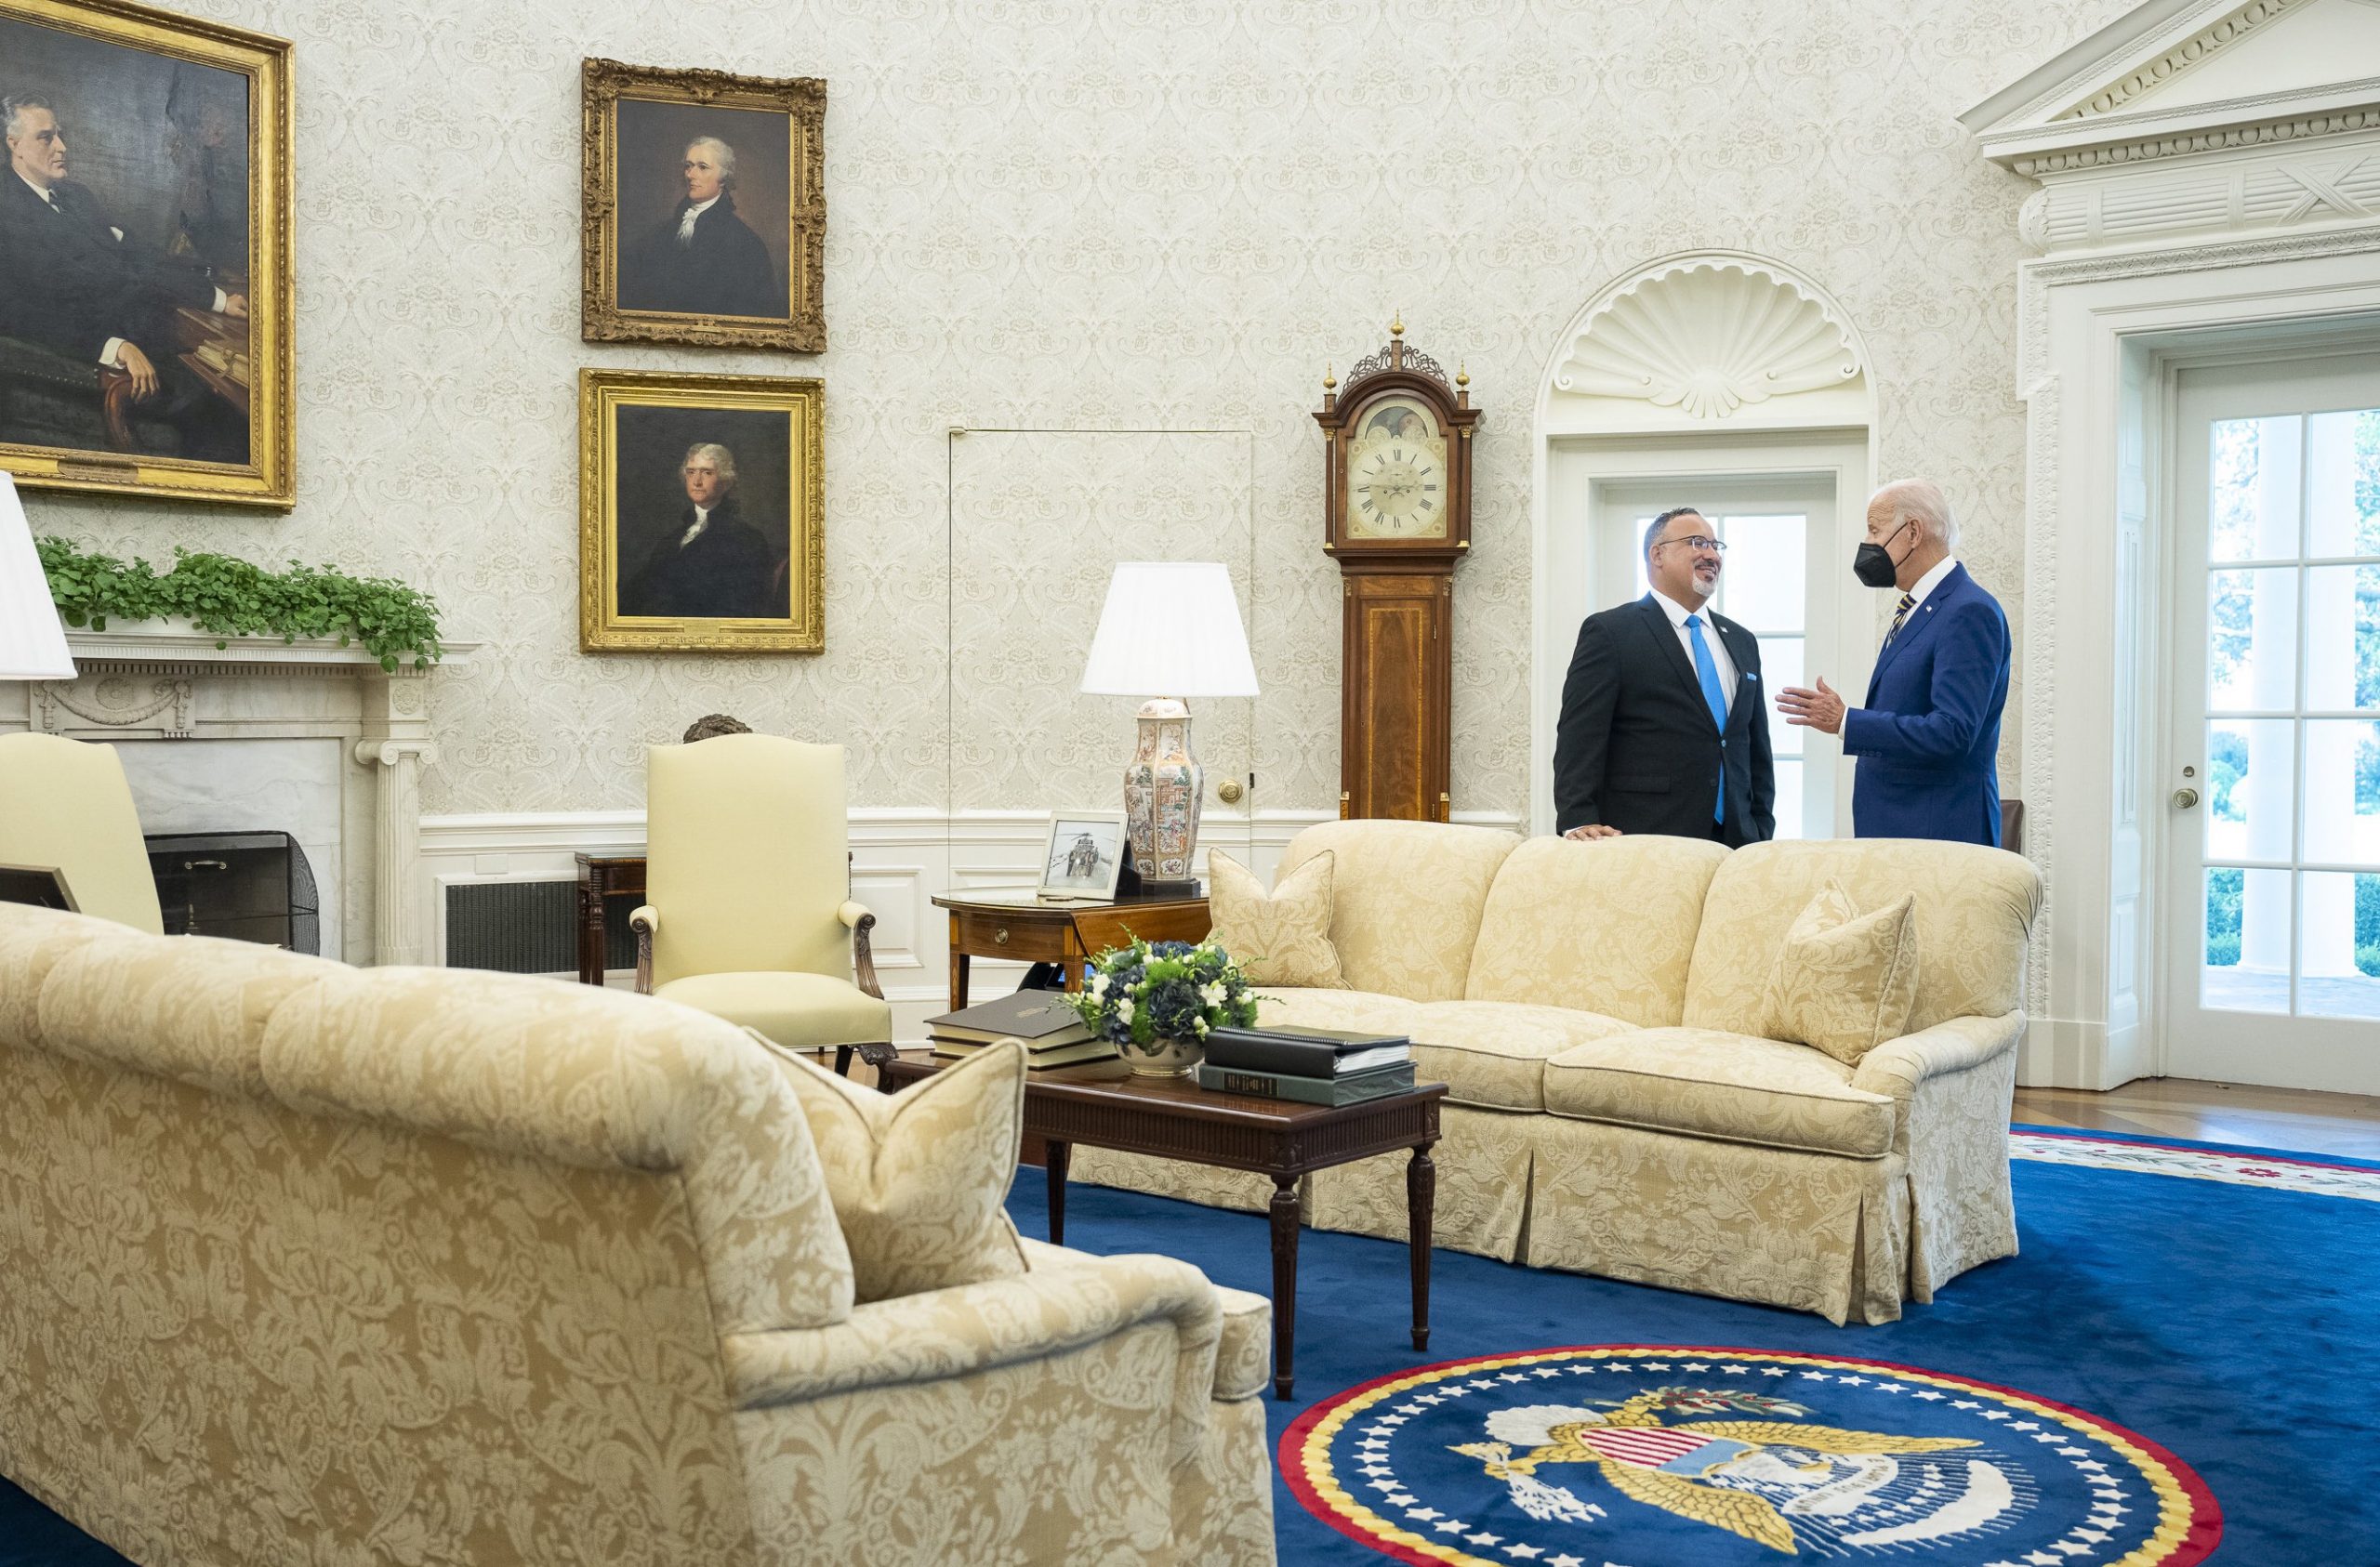 Two men, the president and education secretary, talk in the Oval Office.